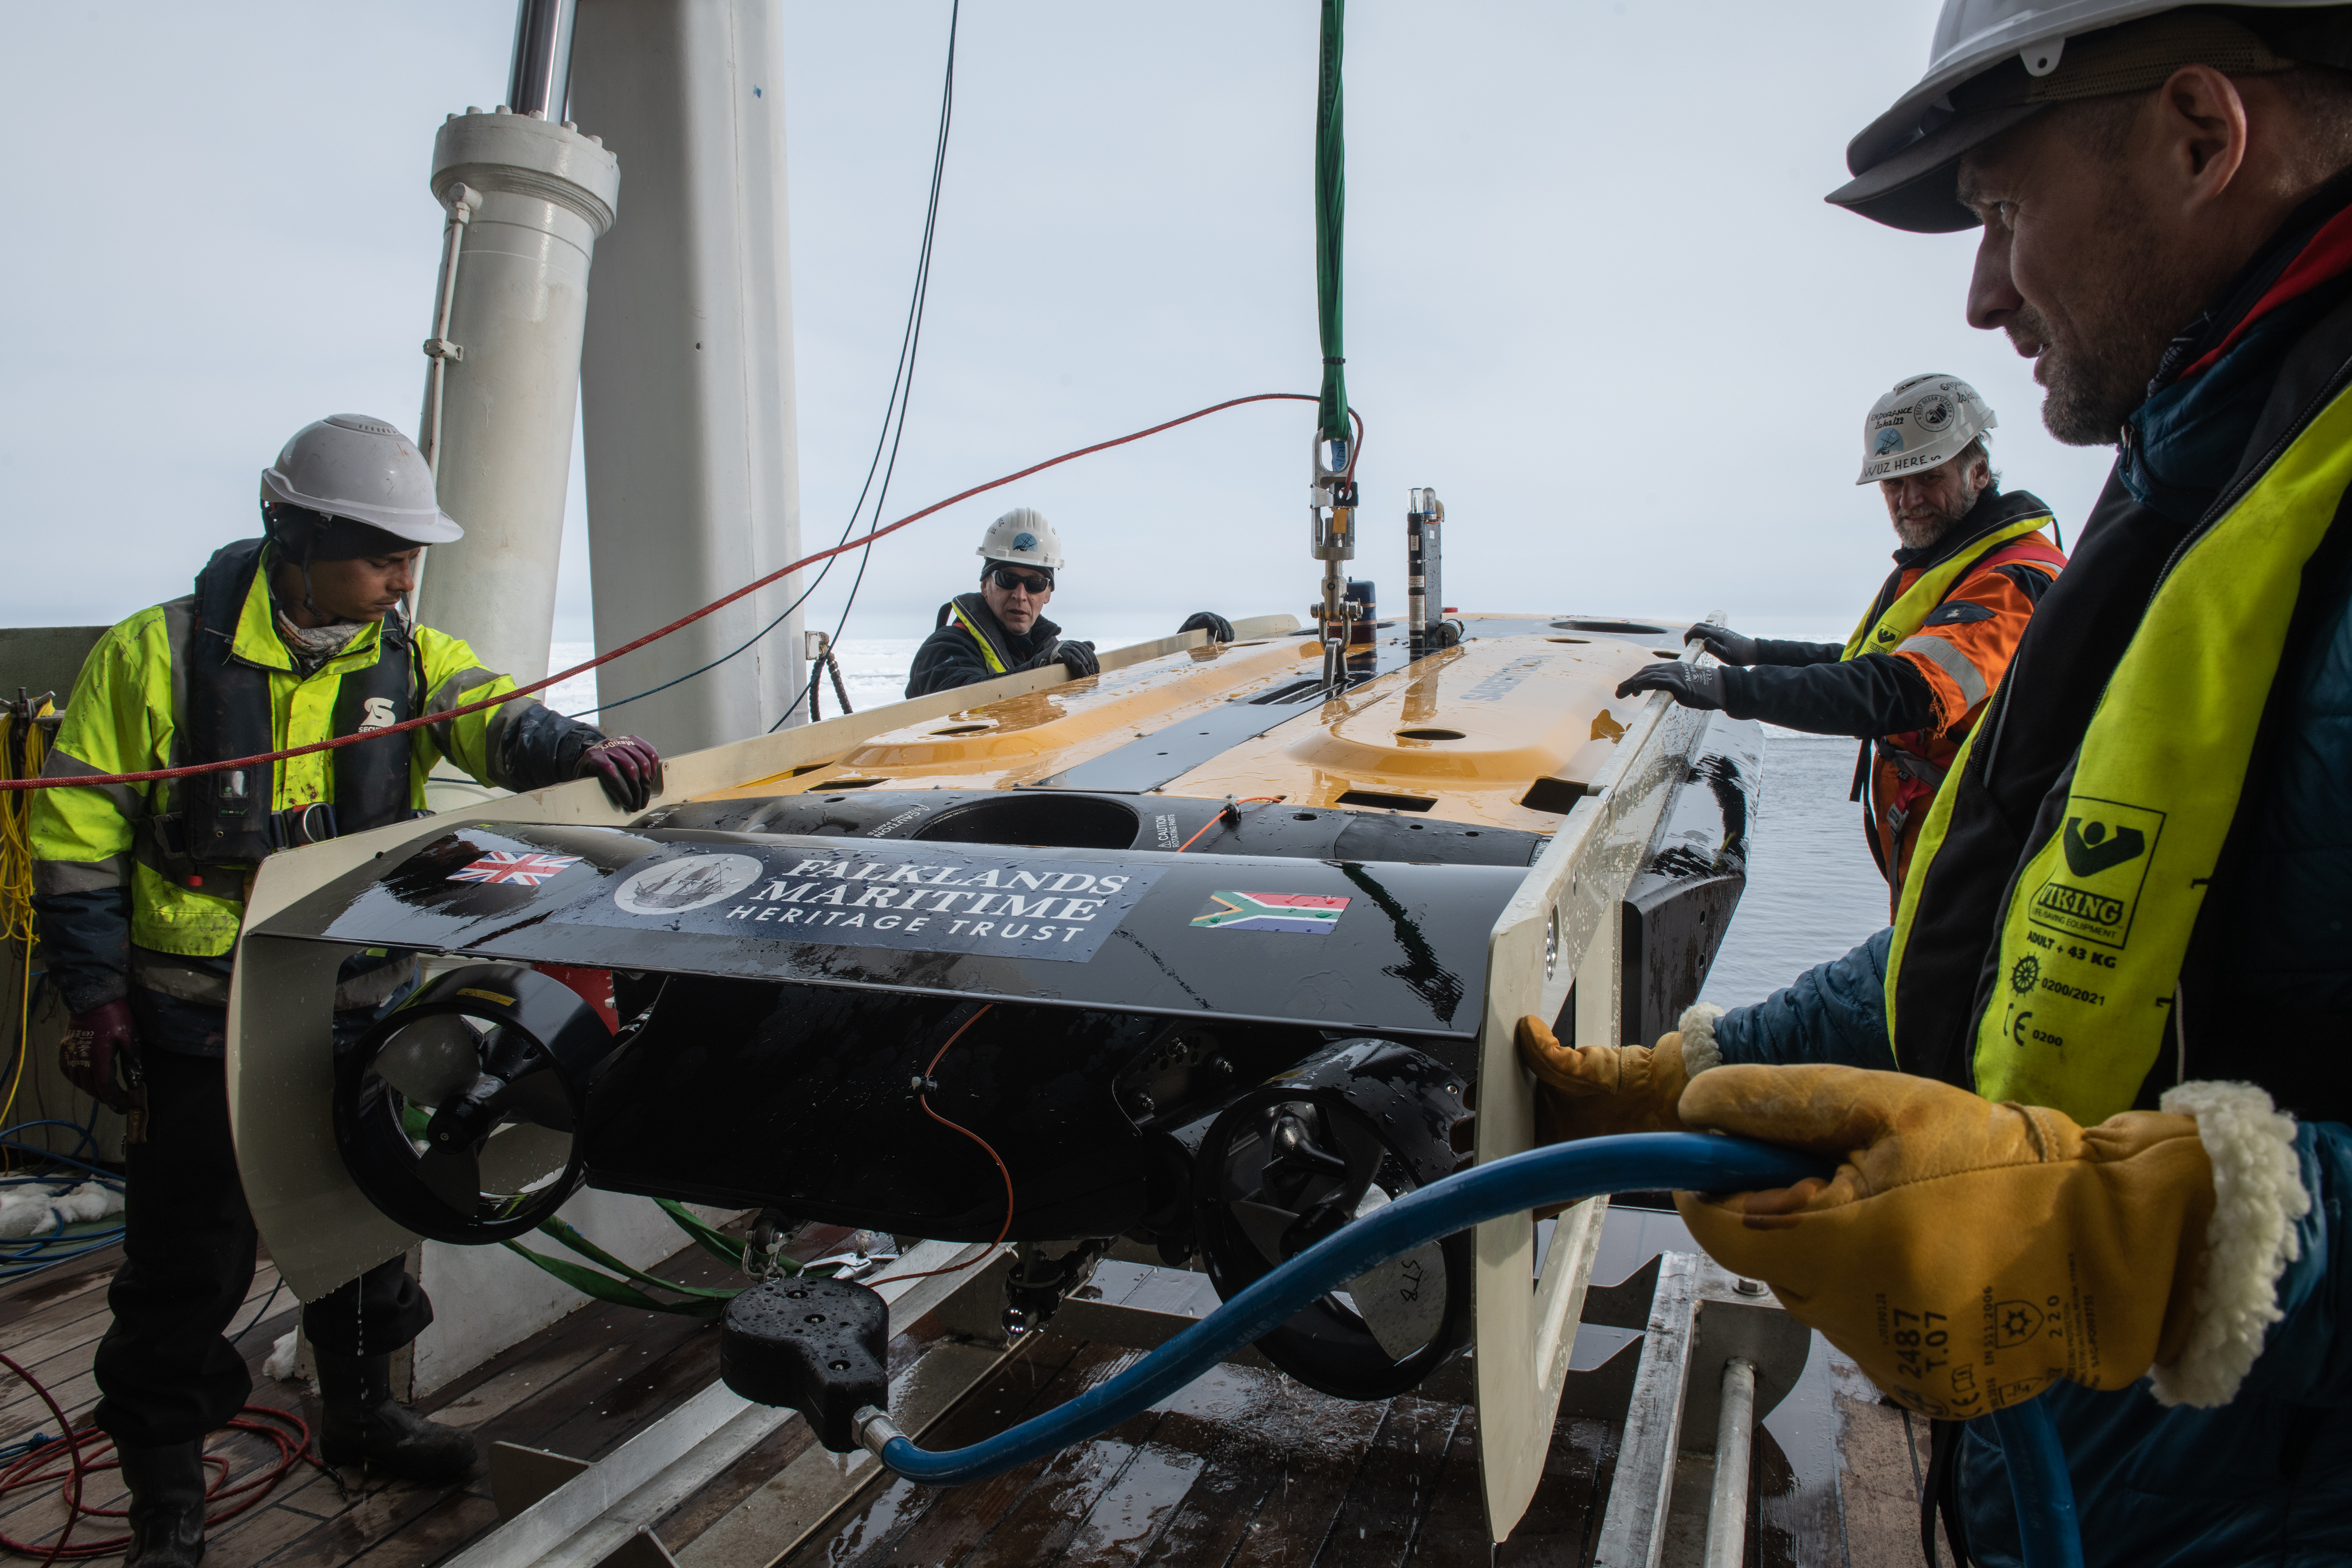 Sub-sea team of Endurance22 expedition and crew of S.A.Agulhas II recover the AUV after a dive in the Weddell Sea, in search for Sir Ernest Shacklaton's ship the Endurance. From left to right: Dean Cedras crew of S.A.Agulhas II, J.C. Caillens, Off-Shore Manager, Frédéric Bassemayousse and Wayne Auton from White Desert team. 